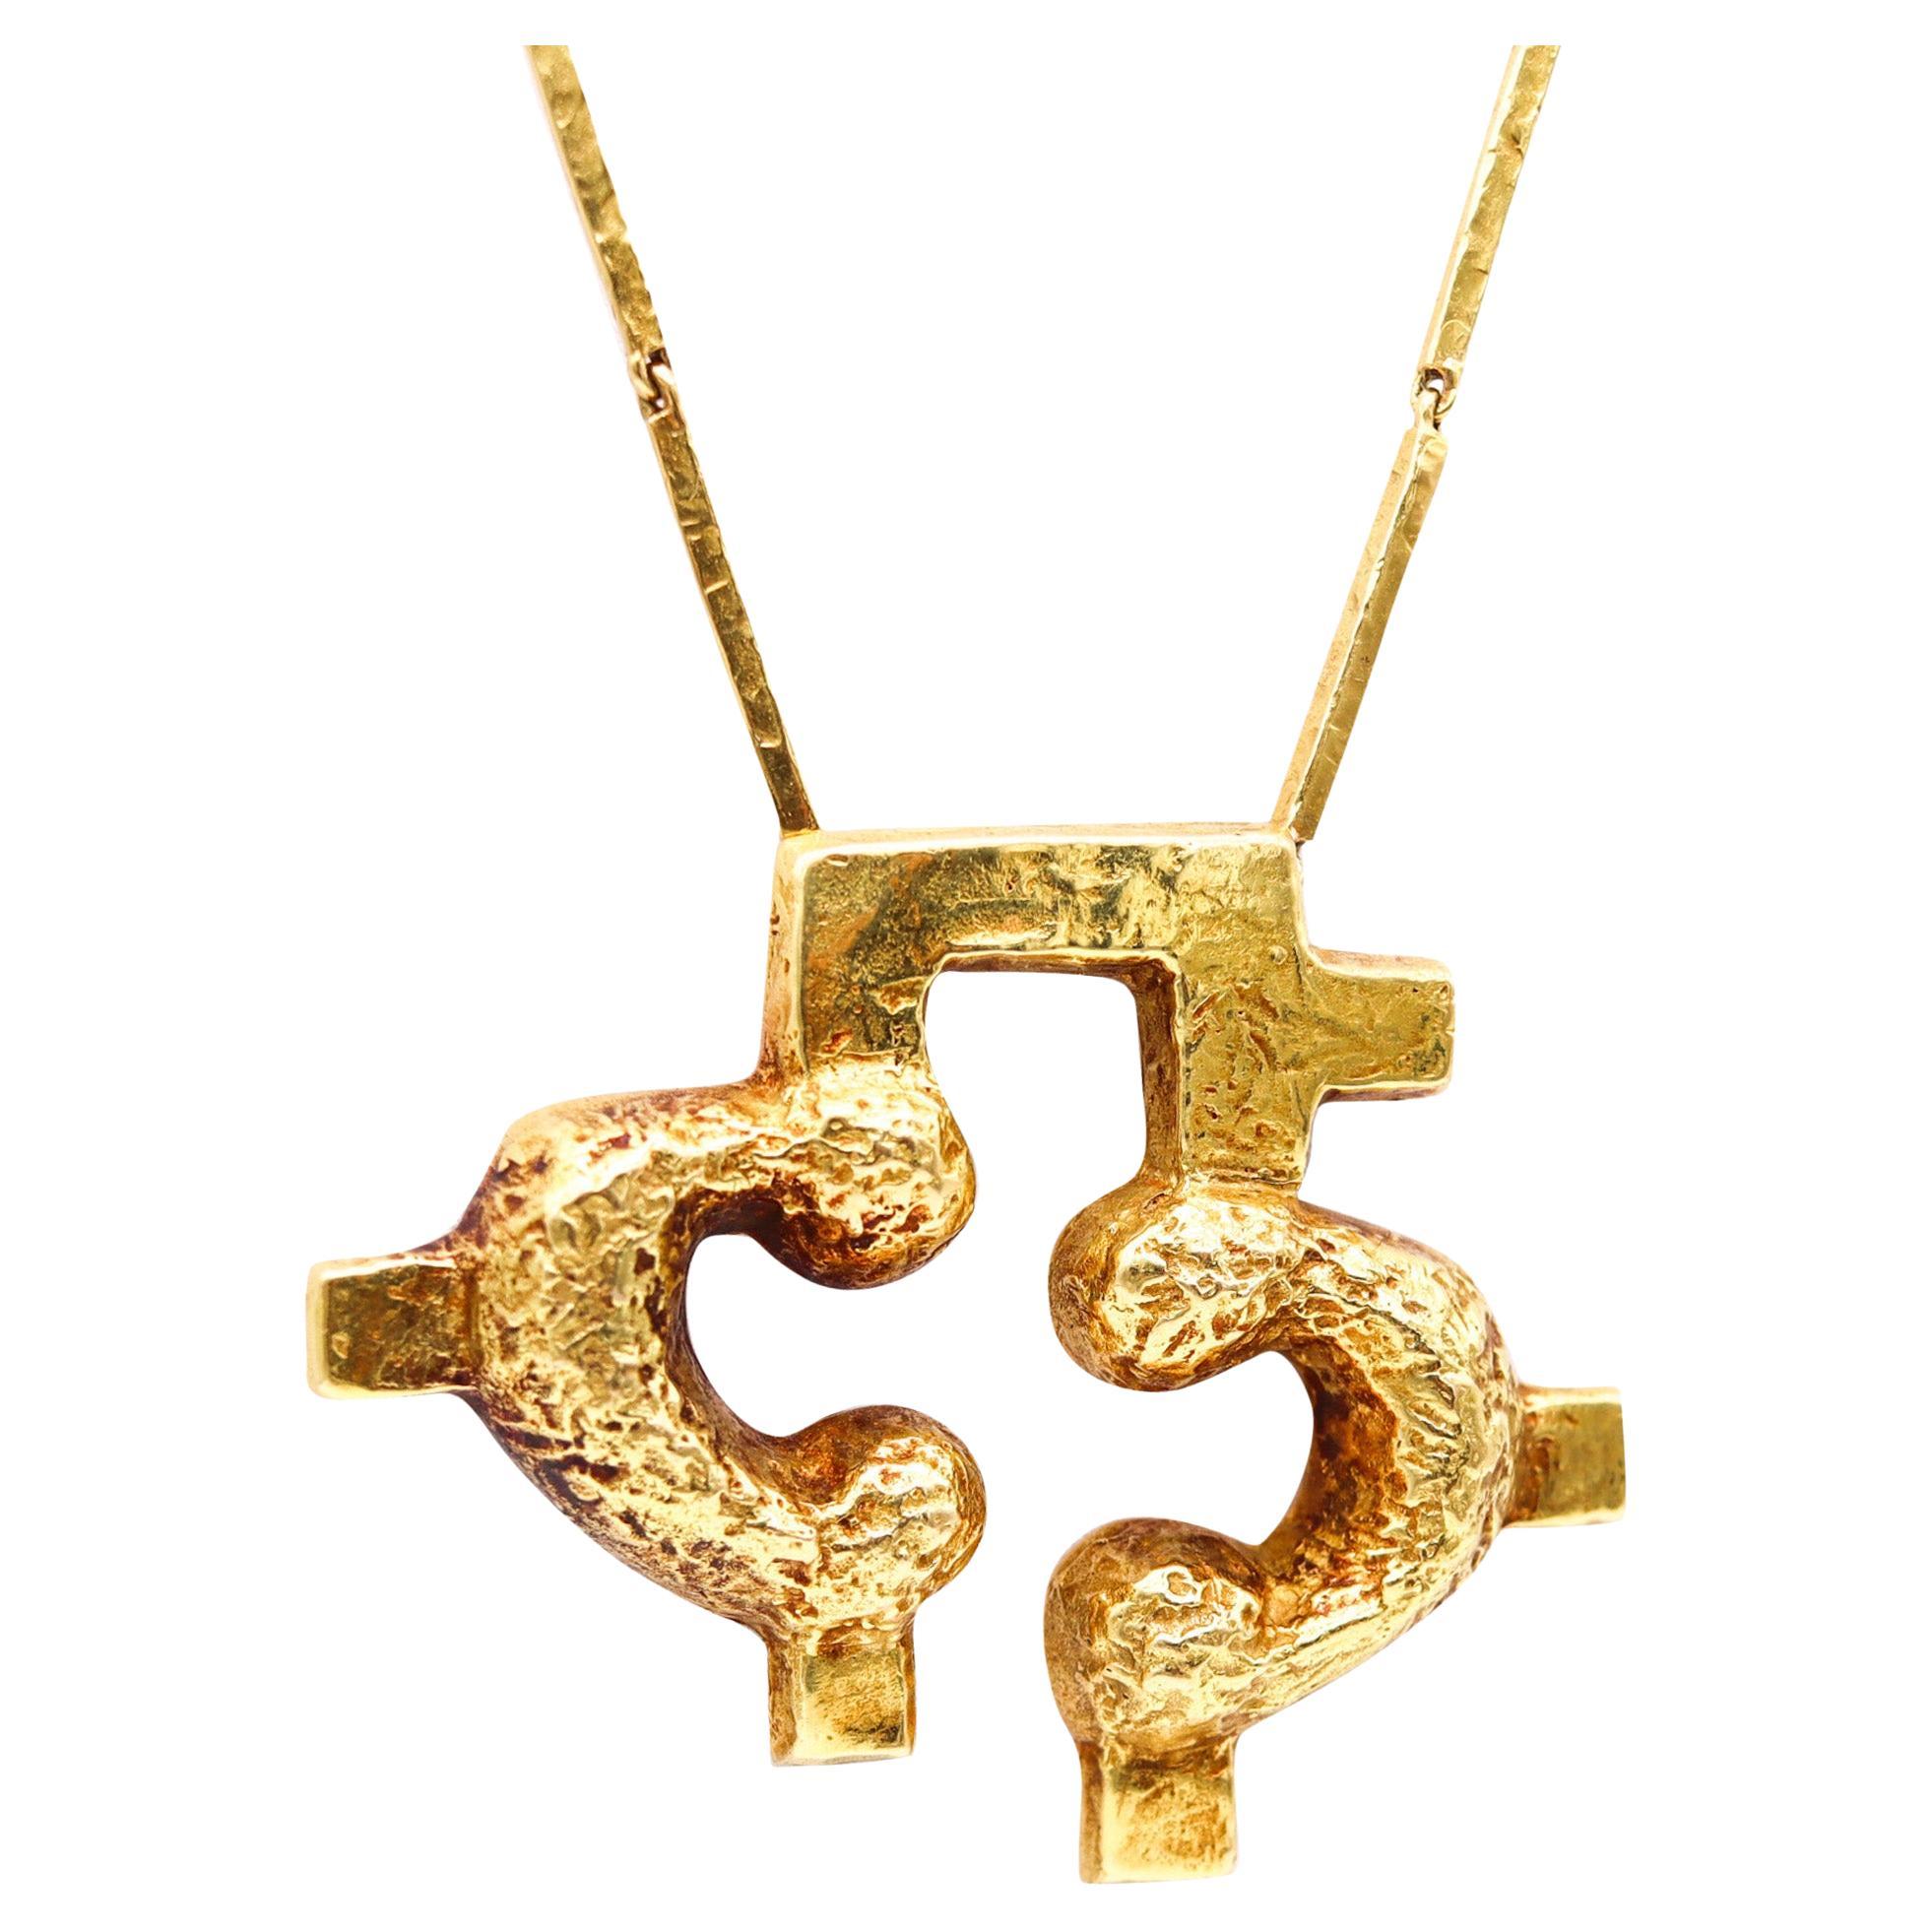 Liuba Wolf 1970 Concretism Sculptural Pendant Necklace Chain In 18Kt Yellow Gold